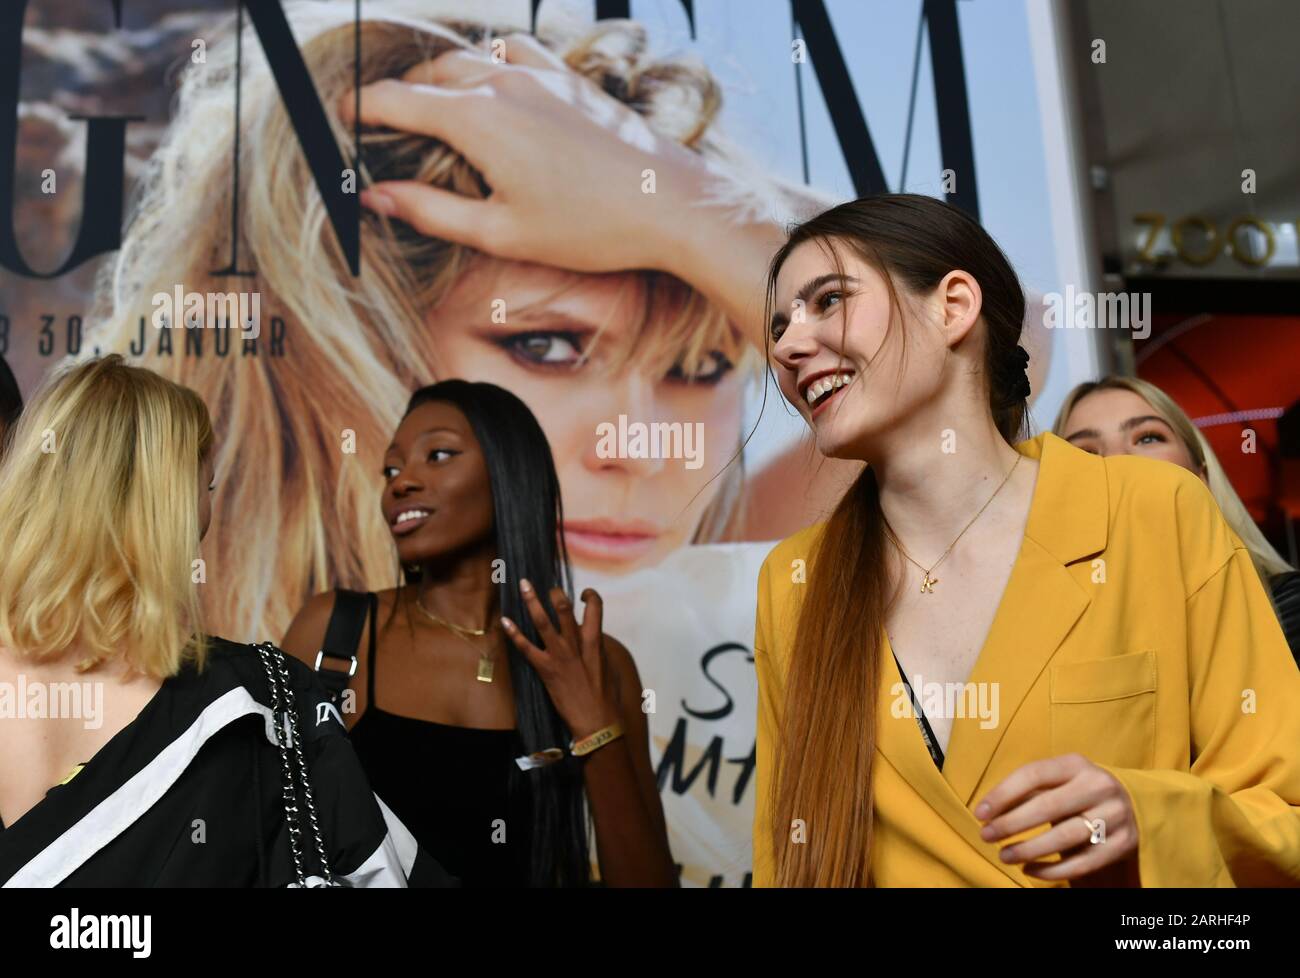 Berlin, Germany. 27th Jan, 2020. The models Trixi Giese (l-r), Toni Dreher-Adenuga and Klaudia with K at the exclusive cinema preview of the 15th season 'Germany's next Topmodel - by Heidi Klum' by ProSieben in the cinema Zoo Palast in front of photos by Heidi Klum. Credit: Jens Kalaene/dpa-Zentralbild/ZB/dpa/Alamy Live News Stock Photo